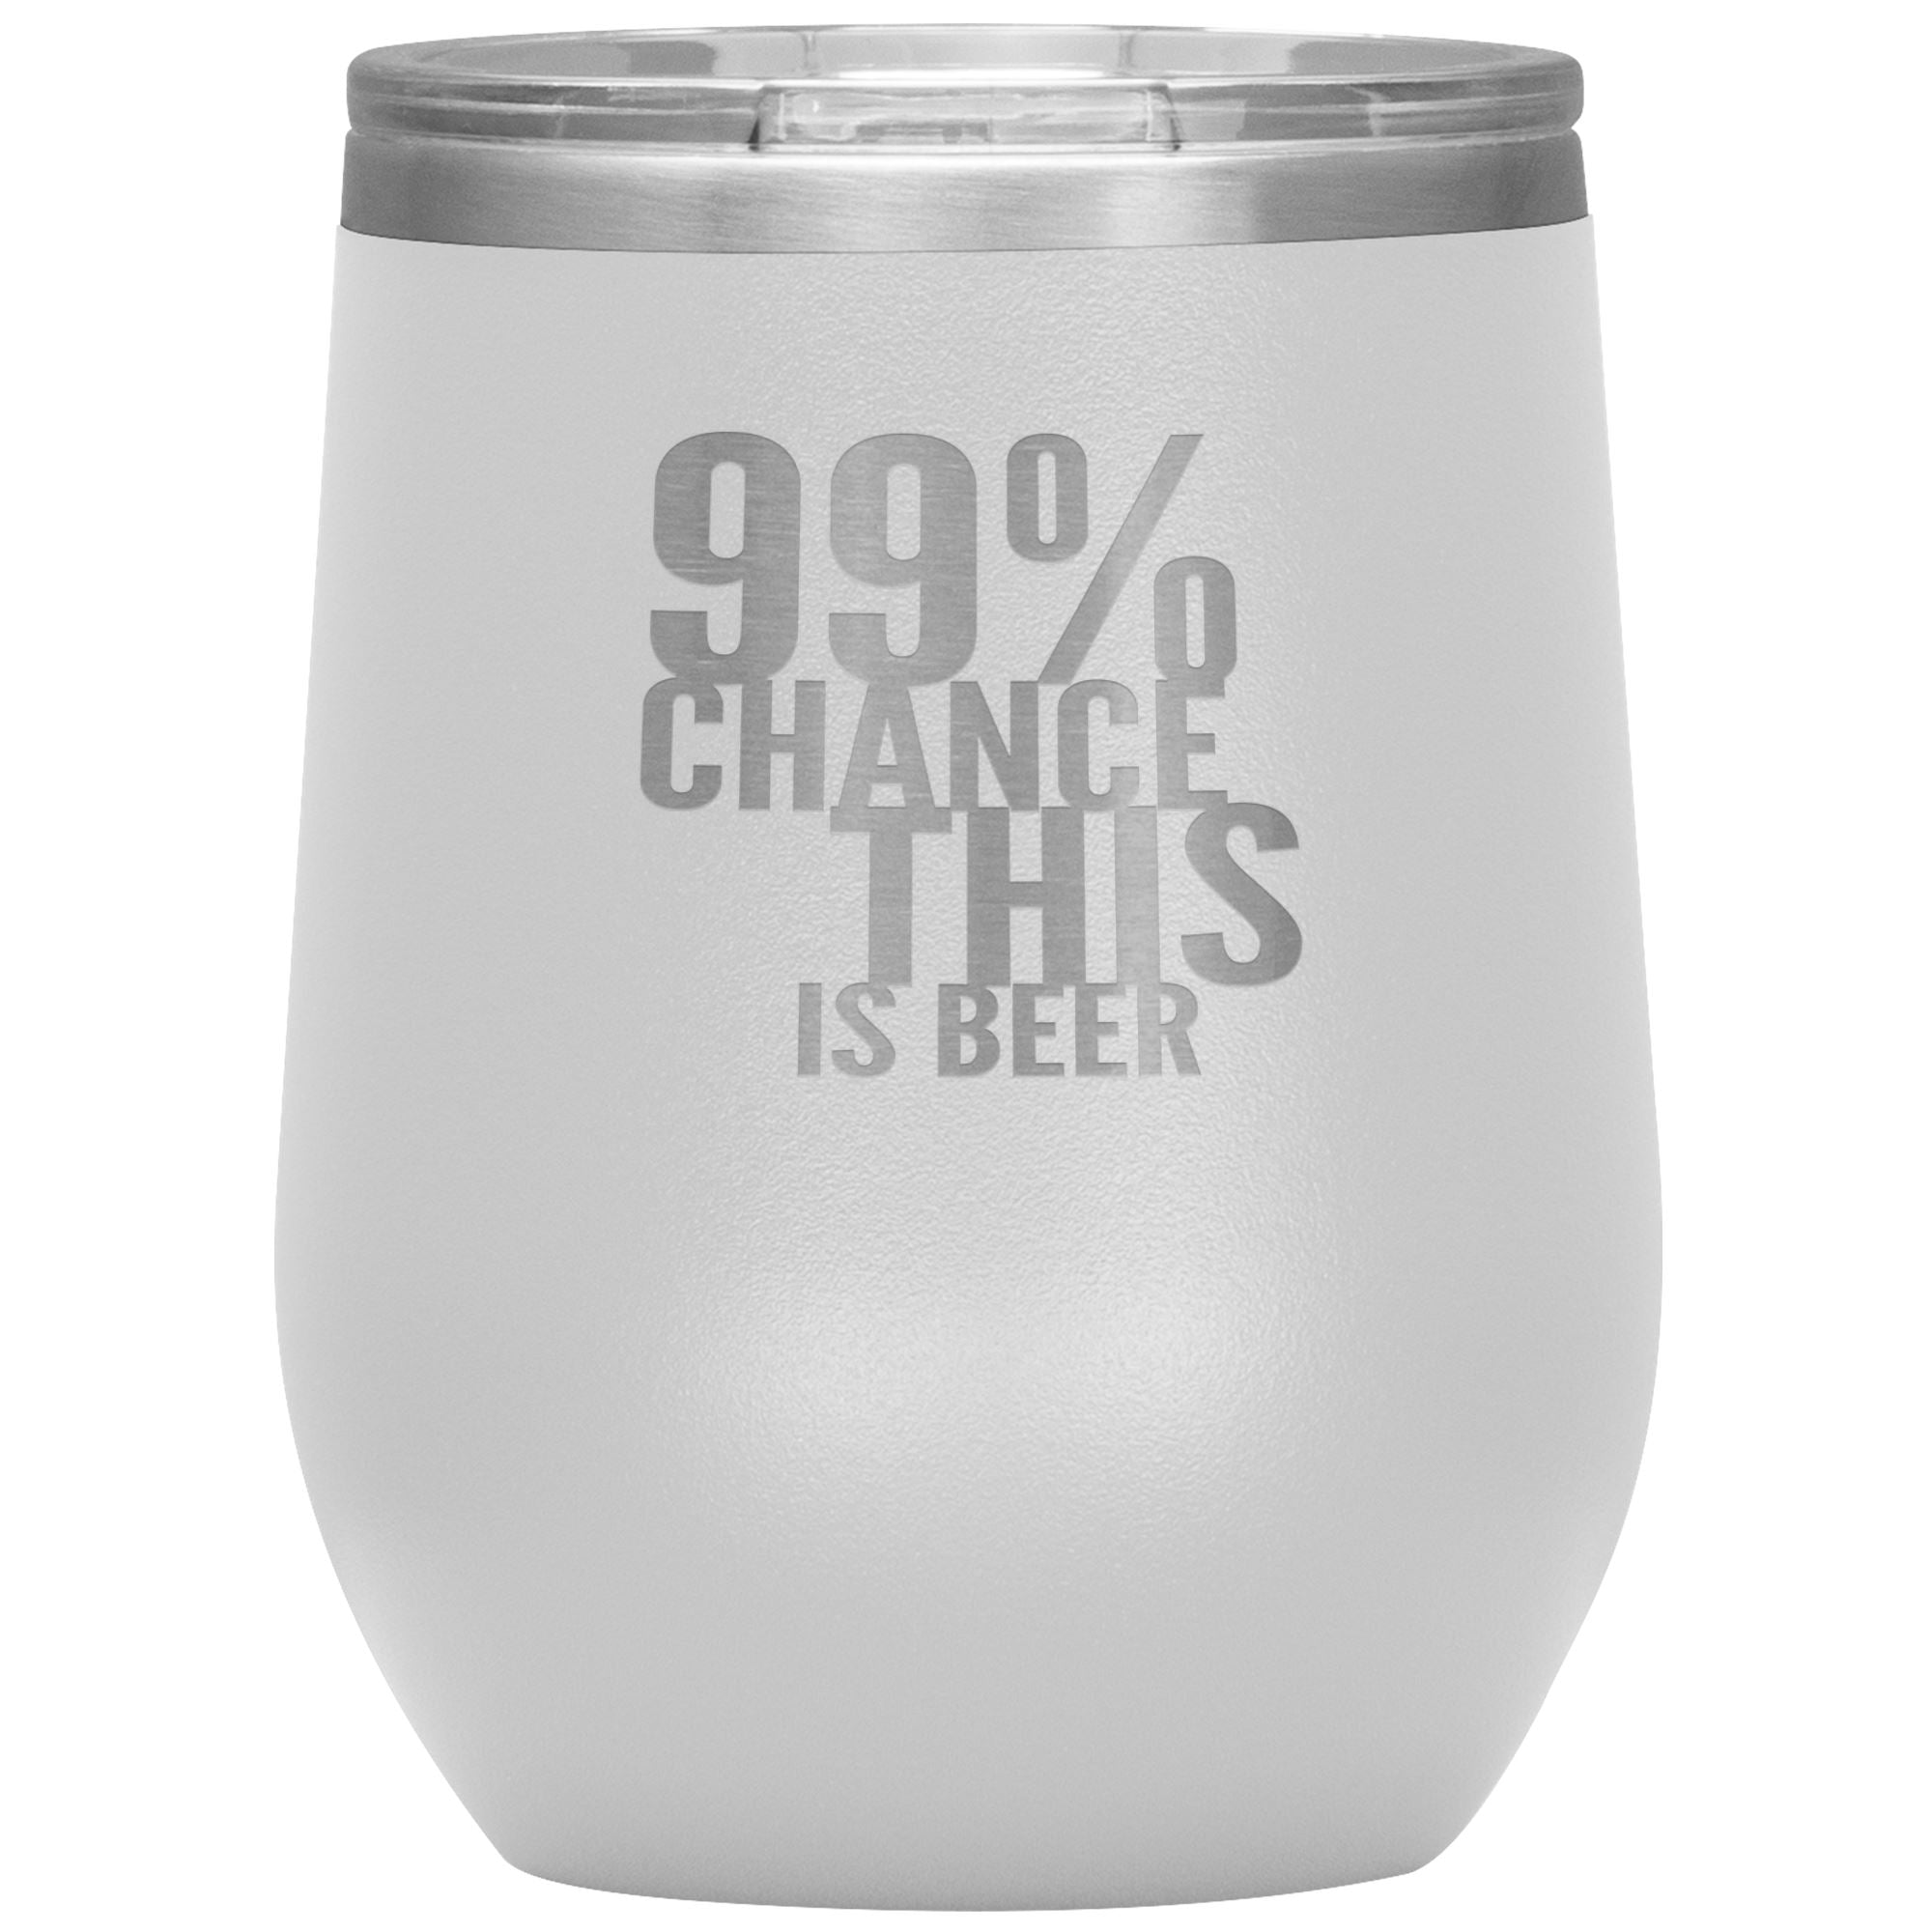 99 Percent Chance This Is Beer Wine 12oz Tumbler Wine Tumbler White 